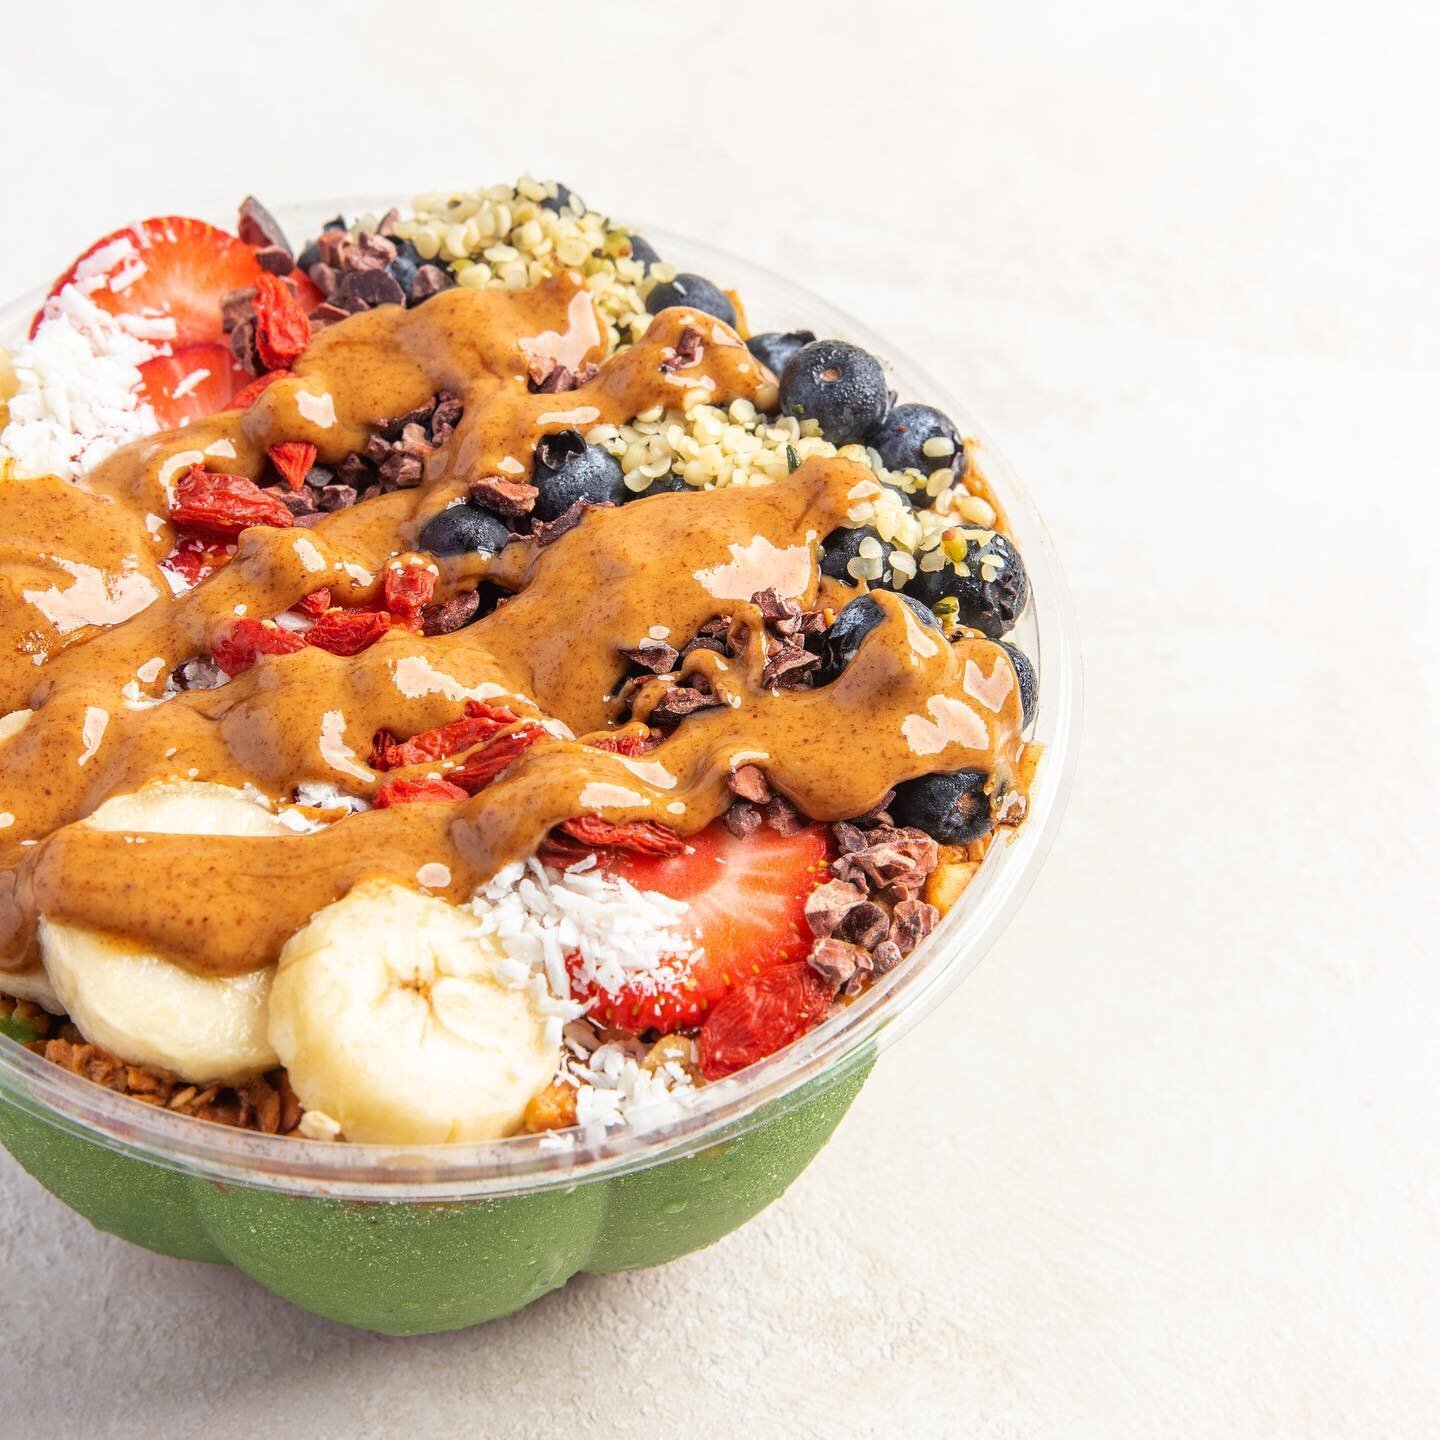 It&rsquo;s heating up again this week so stay cool with our protein packed Popeye Bowl 🔥🌱💪🏻 Perfect breakfast on the go, post-workout snack or afternoon pick me up. 
⠀⠀⠀⠀⠀⠀⠀⠀⠀ 
⠀⠀⠀⠀⠀⠀⠀⠀⠀ 
⠀⠀⠀⠀⠀⠀⠀⠀⠀ ⠀⠀⠀⠀⠀⠀⠀⠀⠀
⠀⠀⠀⠀⠀⠀⠀⠀⠀
➖➖➖
📍 Newport Beach + Dana 